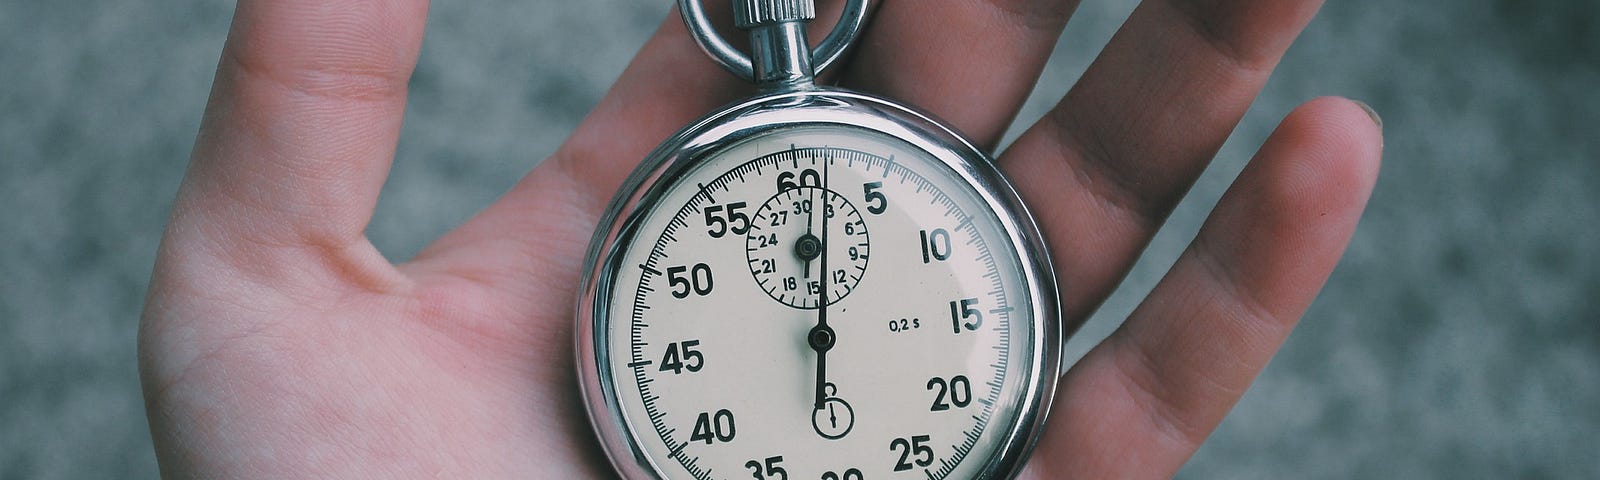 Image of hand holding time piece